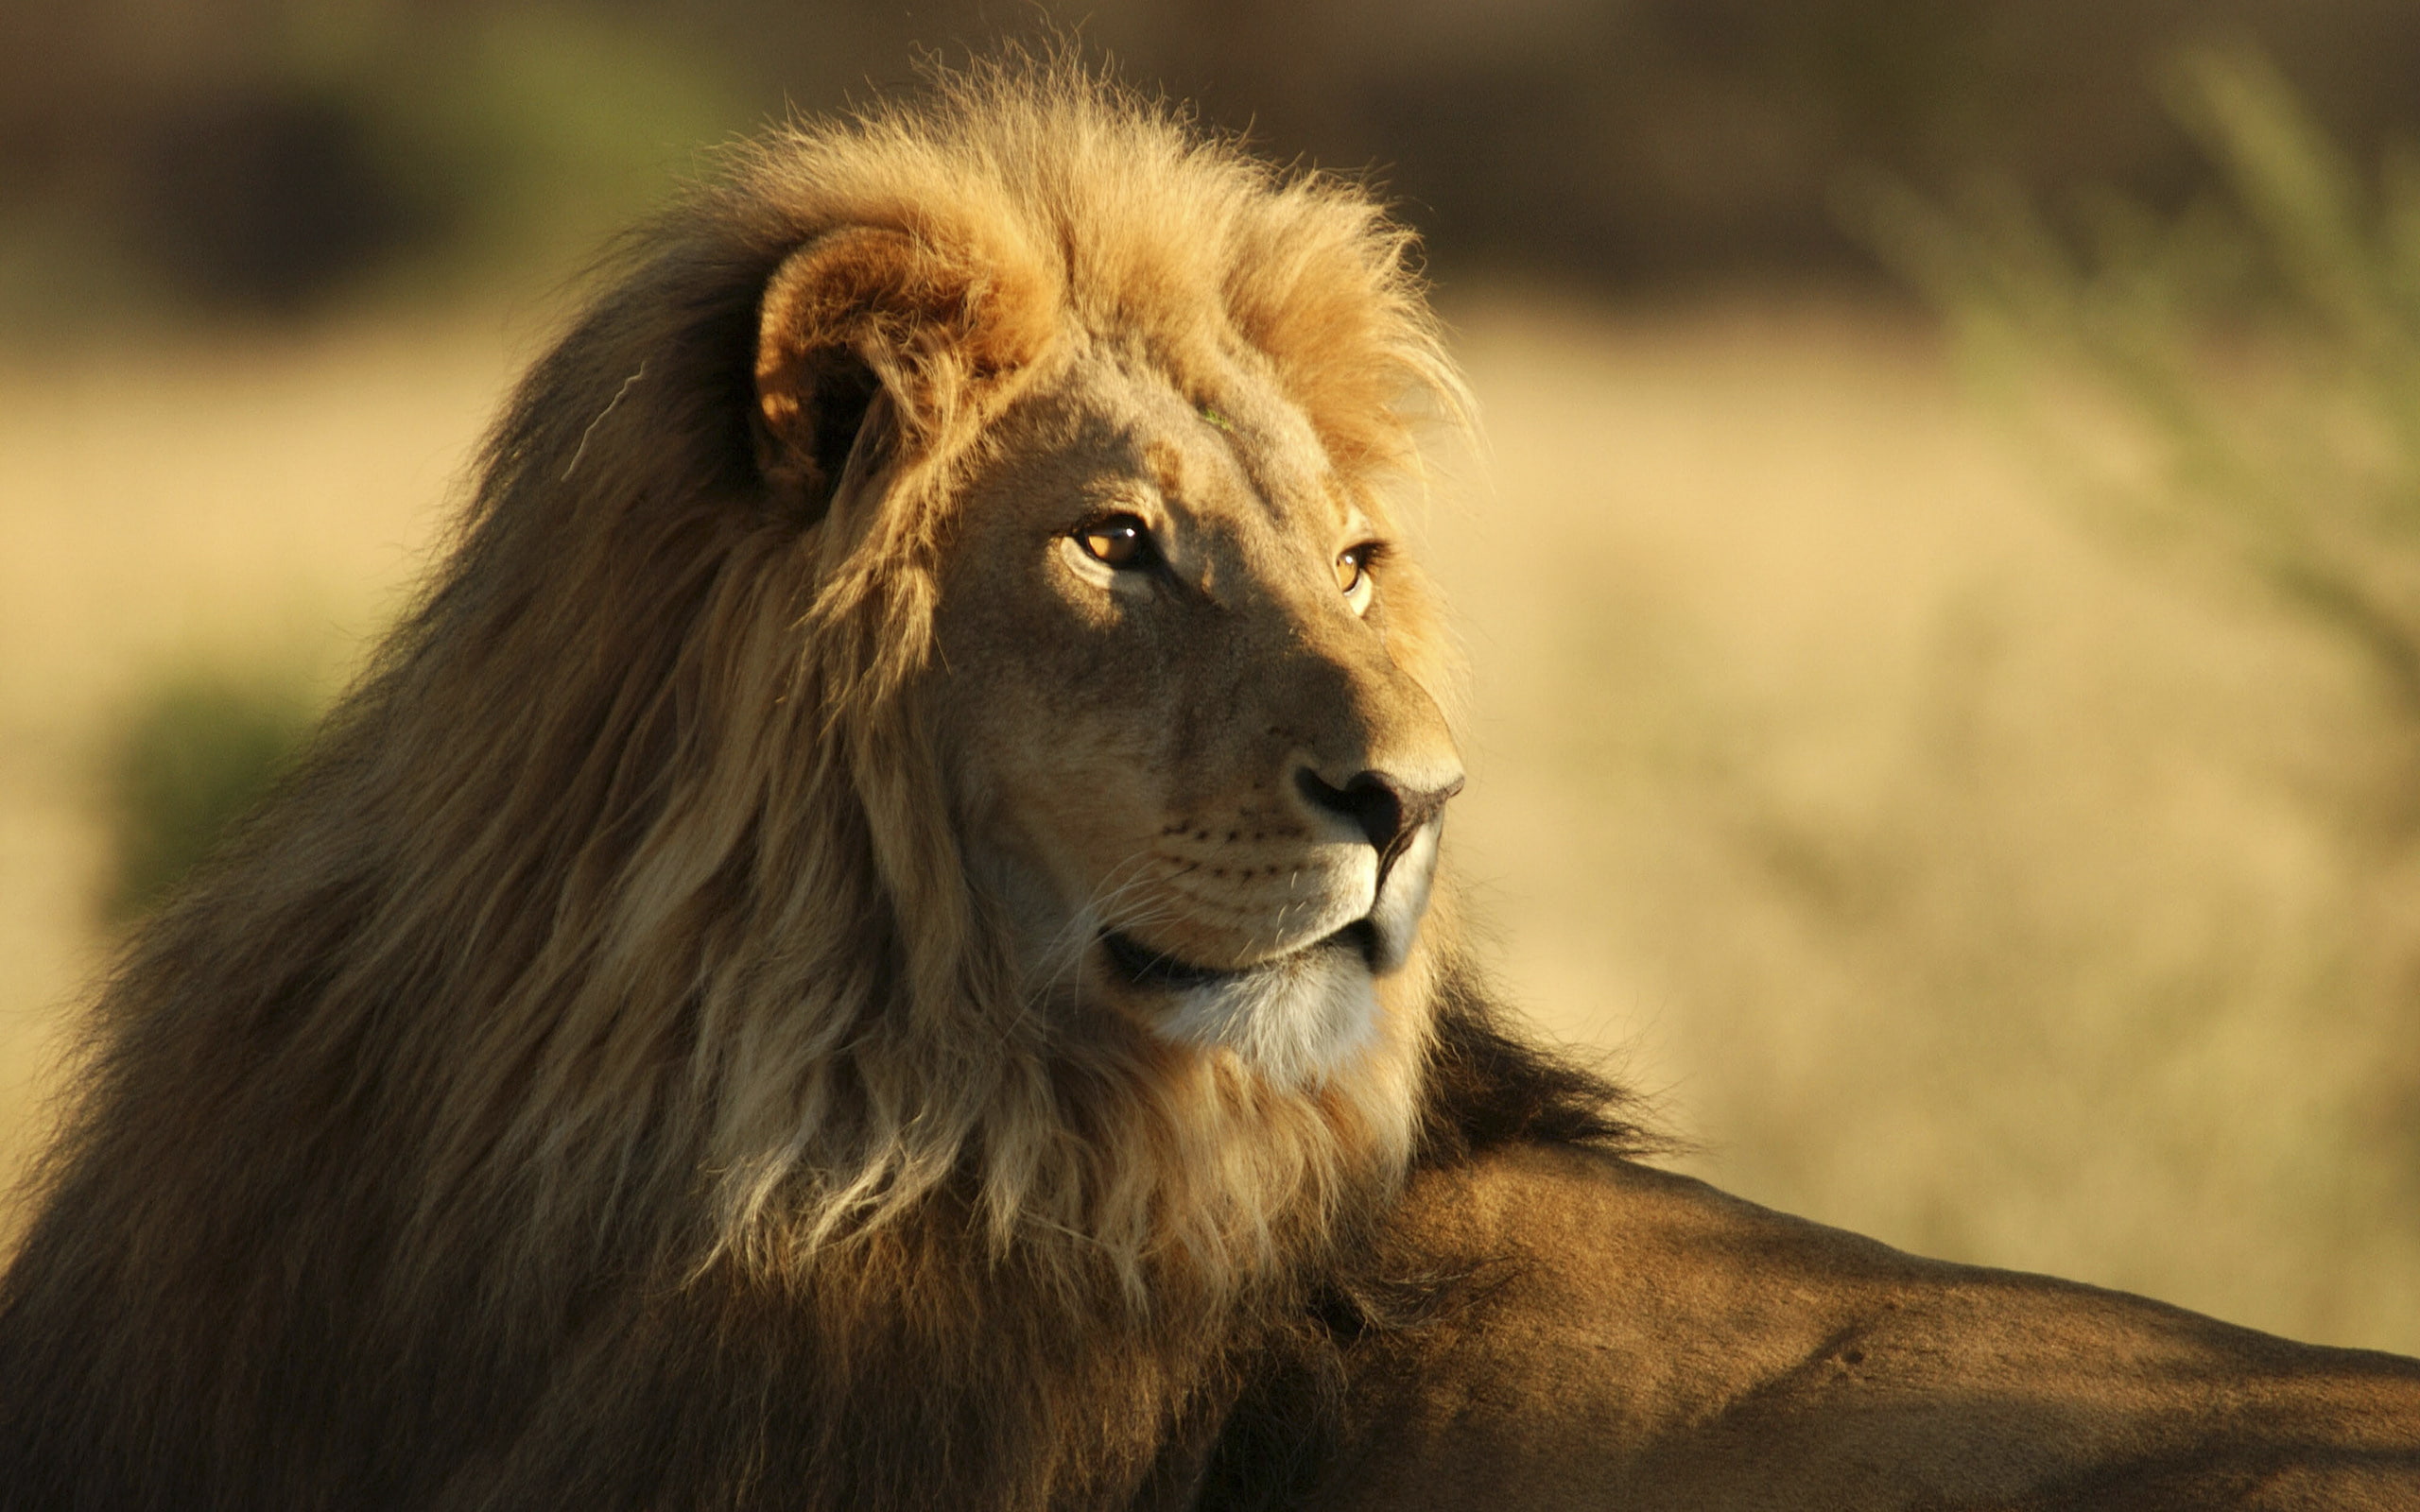 The Male African Lion, brown lion